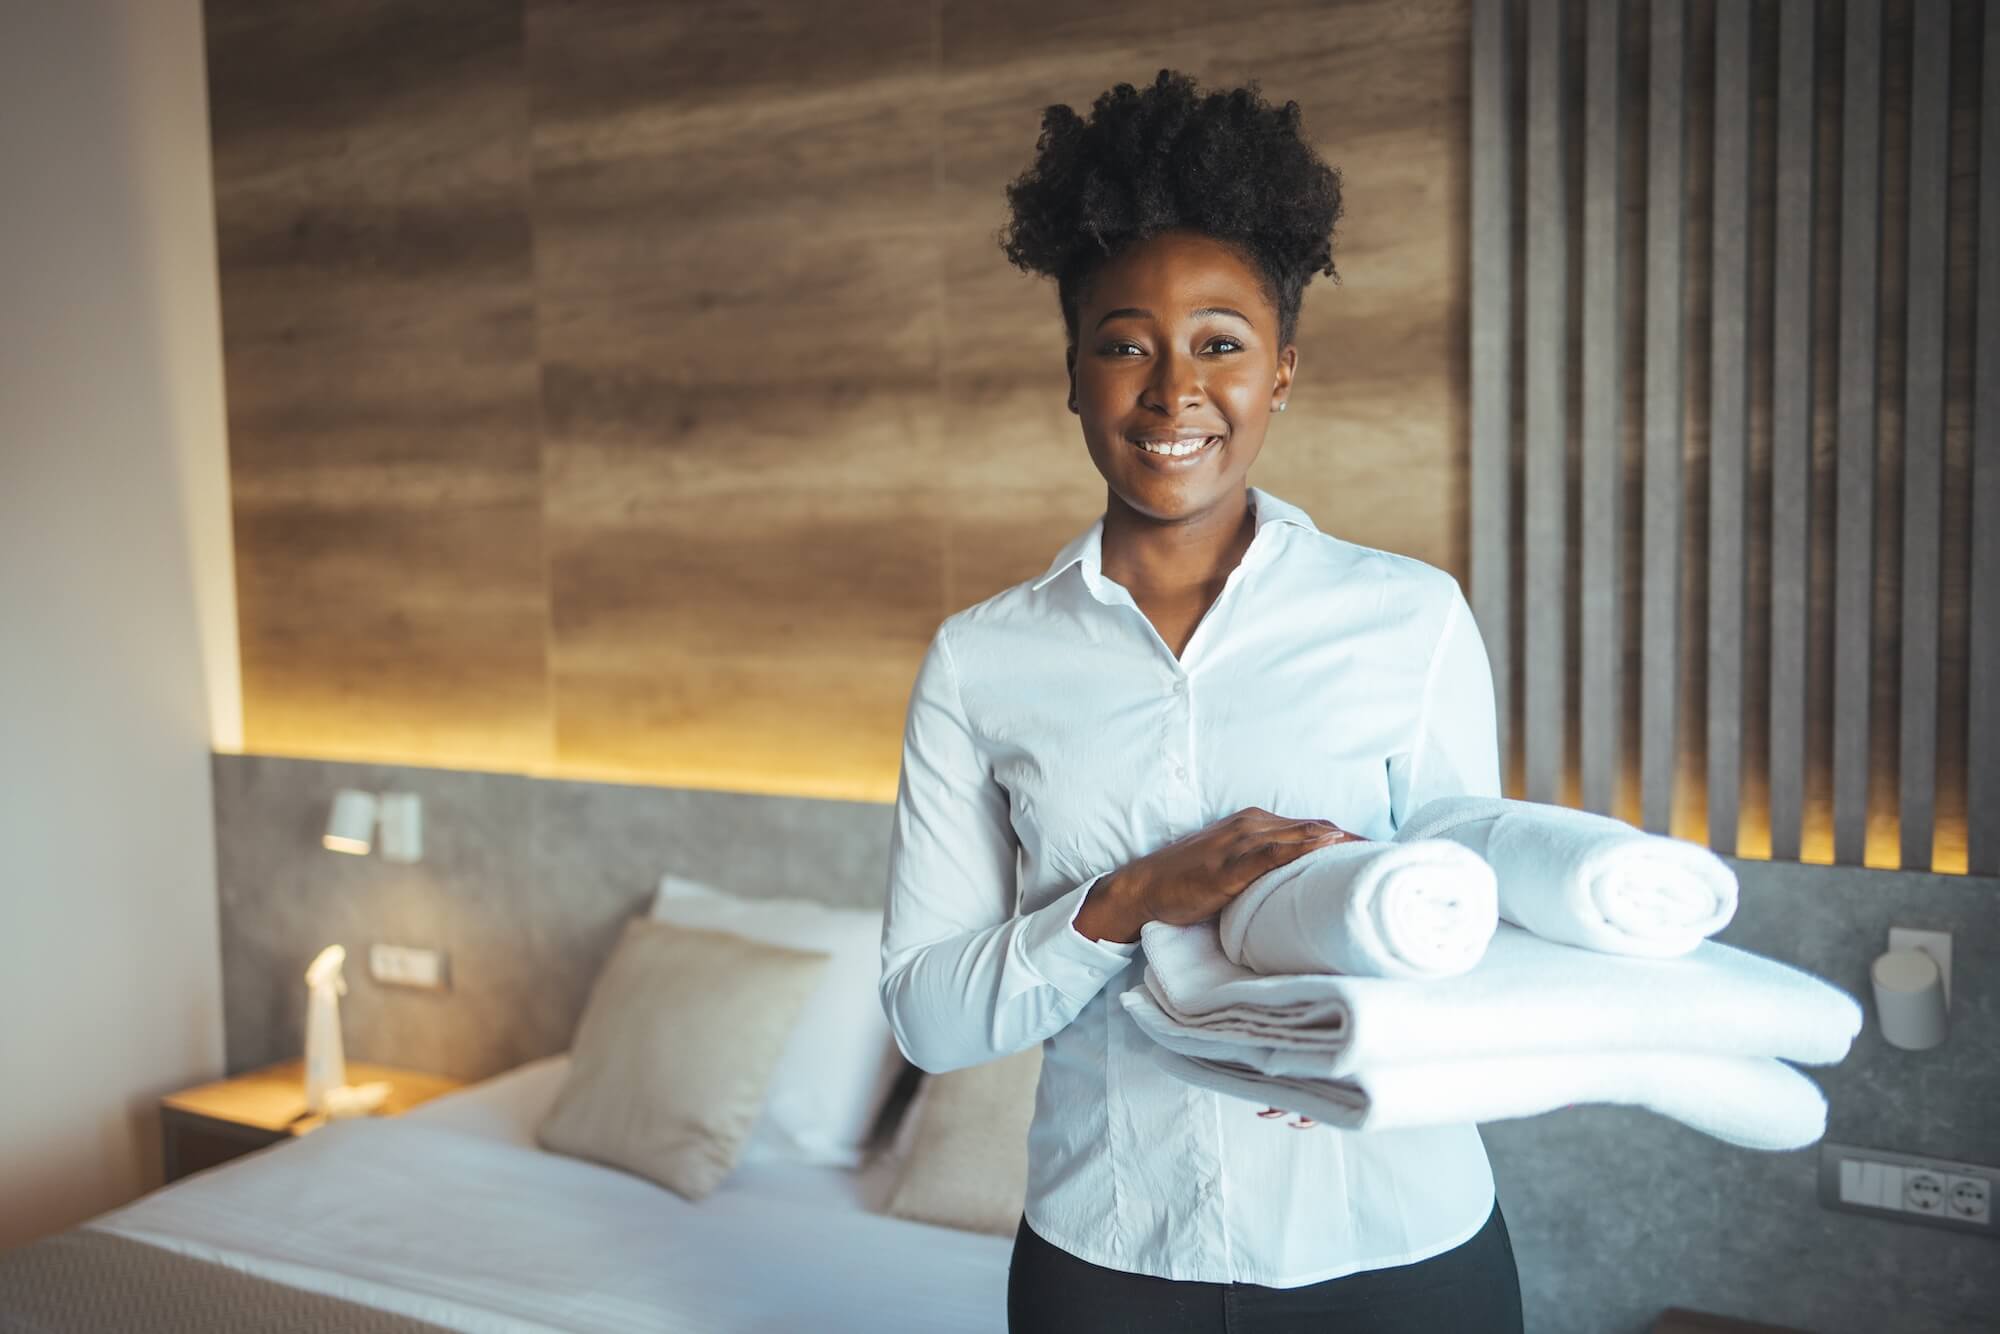 Jacksonville FL Housekeeping services, hire a housekeeper in Jacksonville FL, housekeepers jacksonville florida